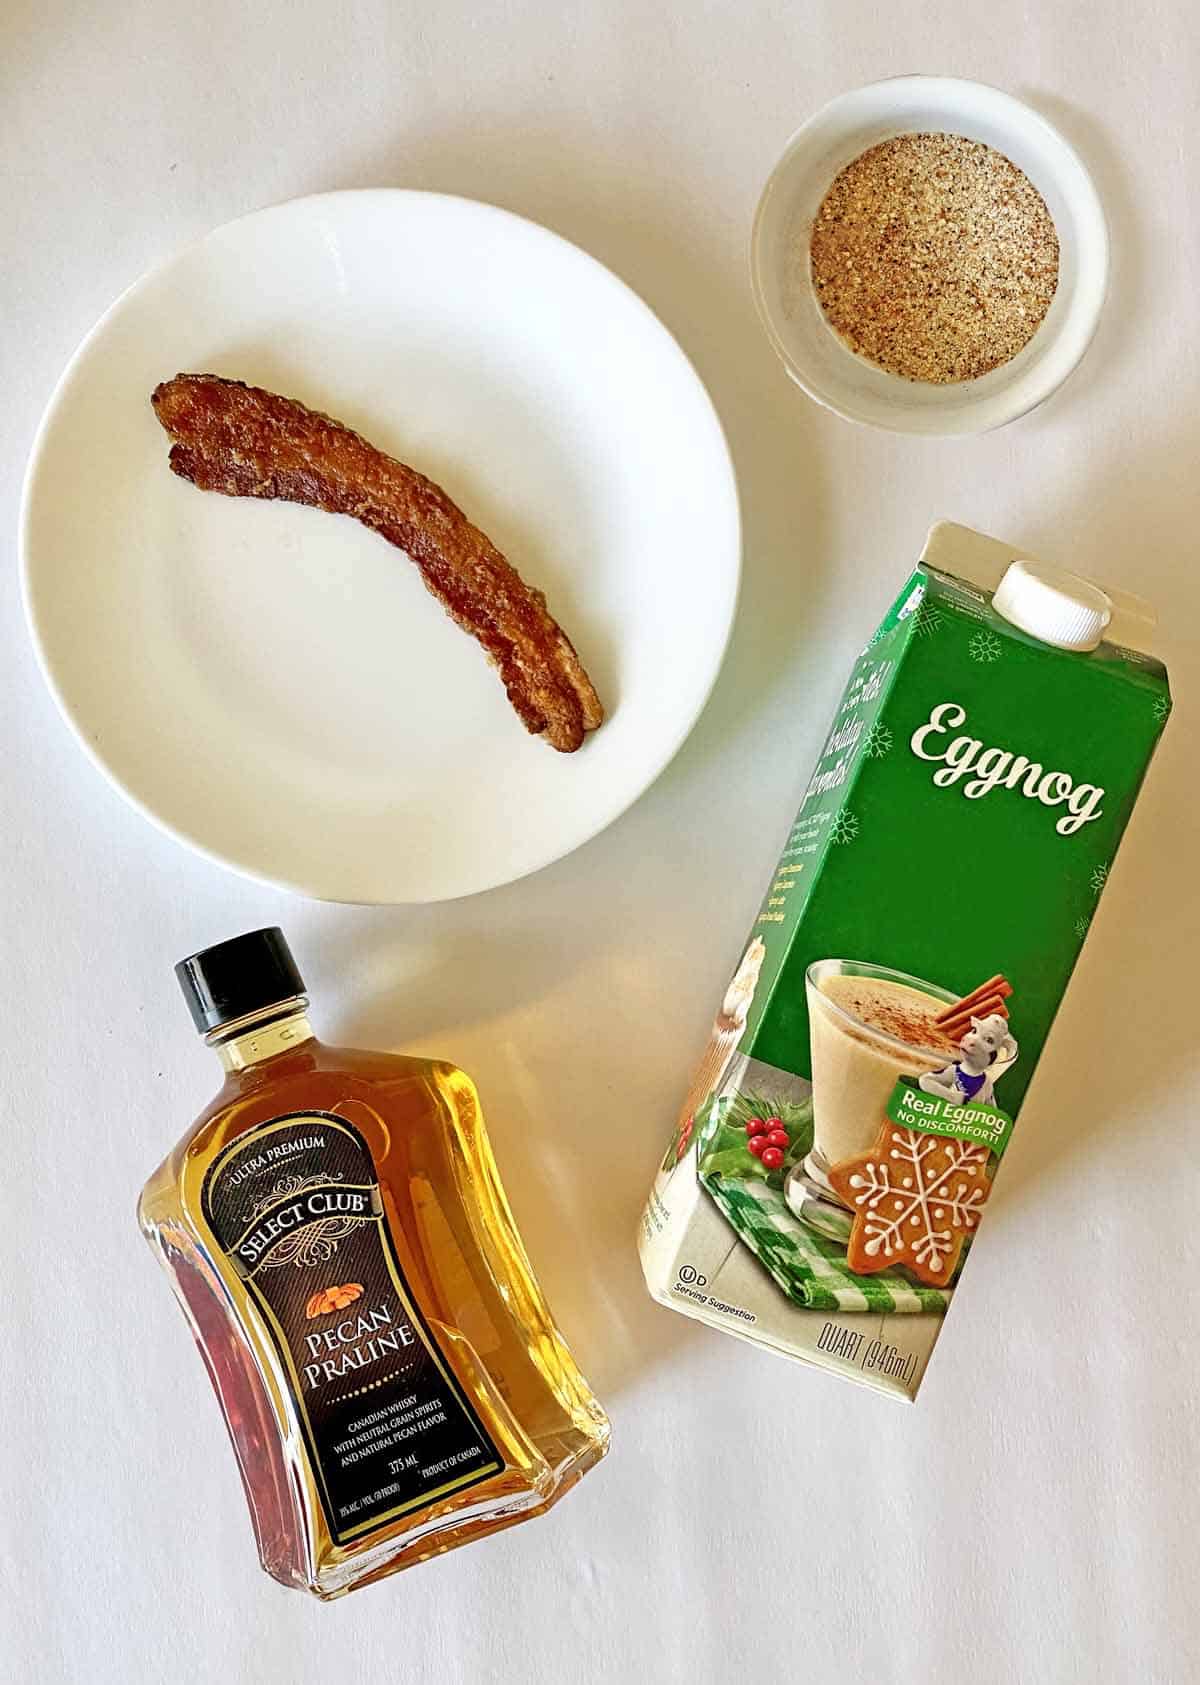 From top, a dish with nutmeg and sugar, a strip of candied bacon, a carton of eggnog and a bottle of pecan praline bourbon whiskey.